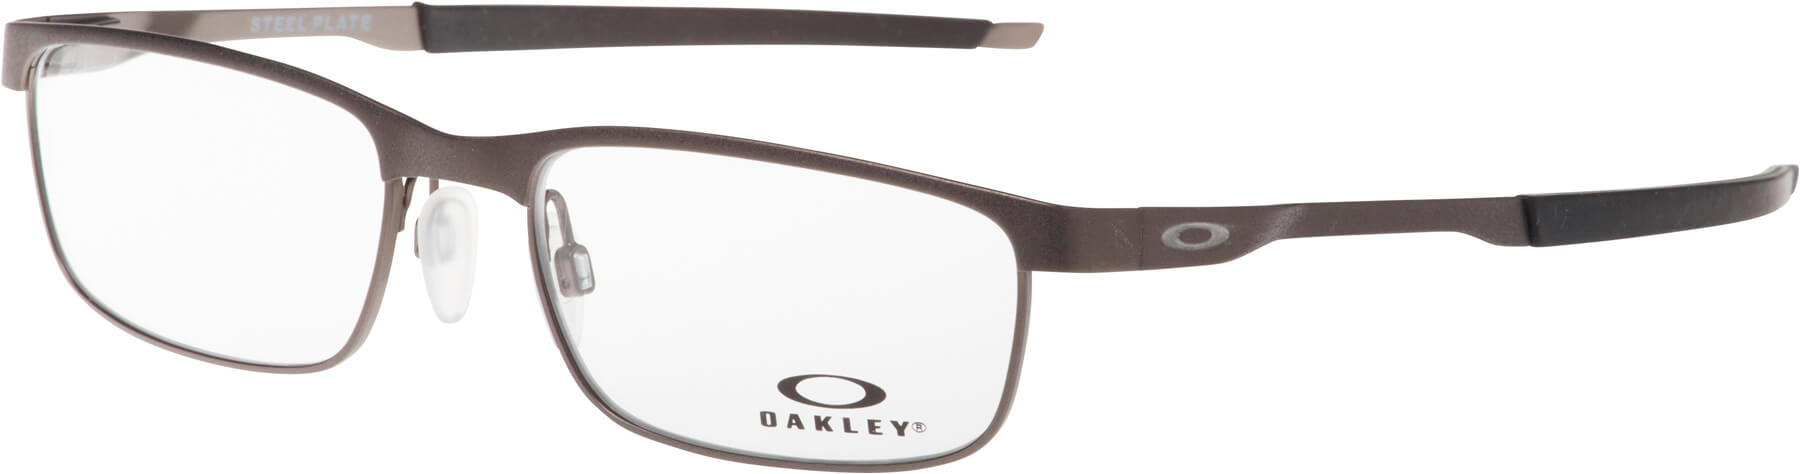 Oakley STEEL PLATE 3222 image number null